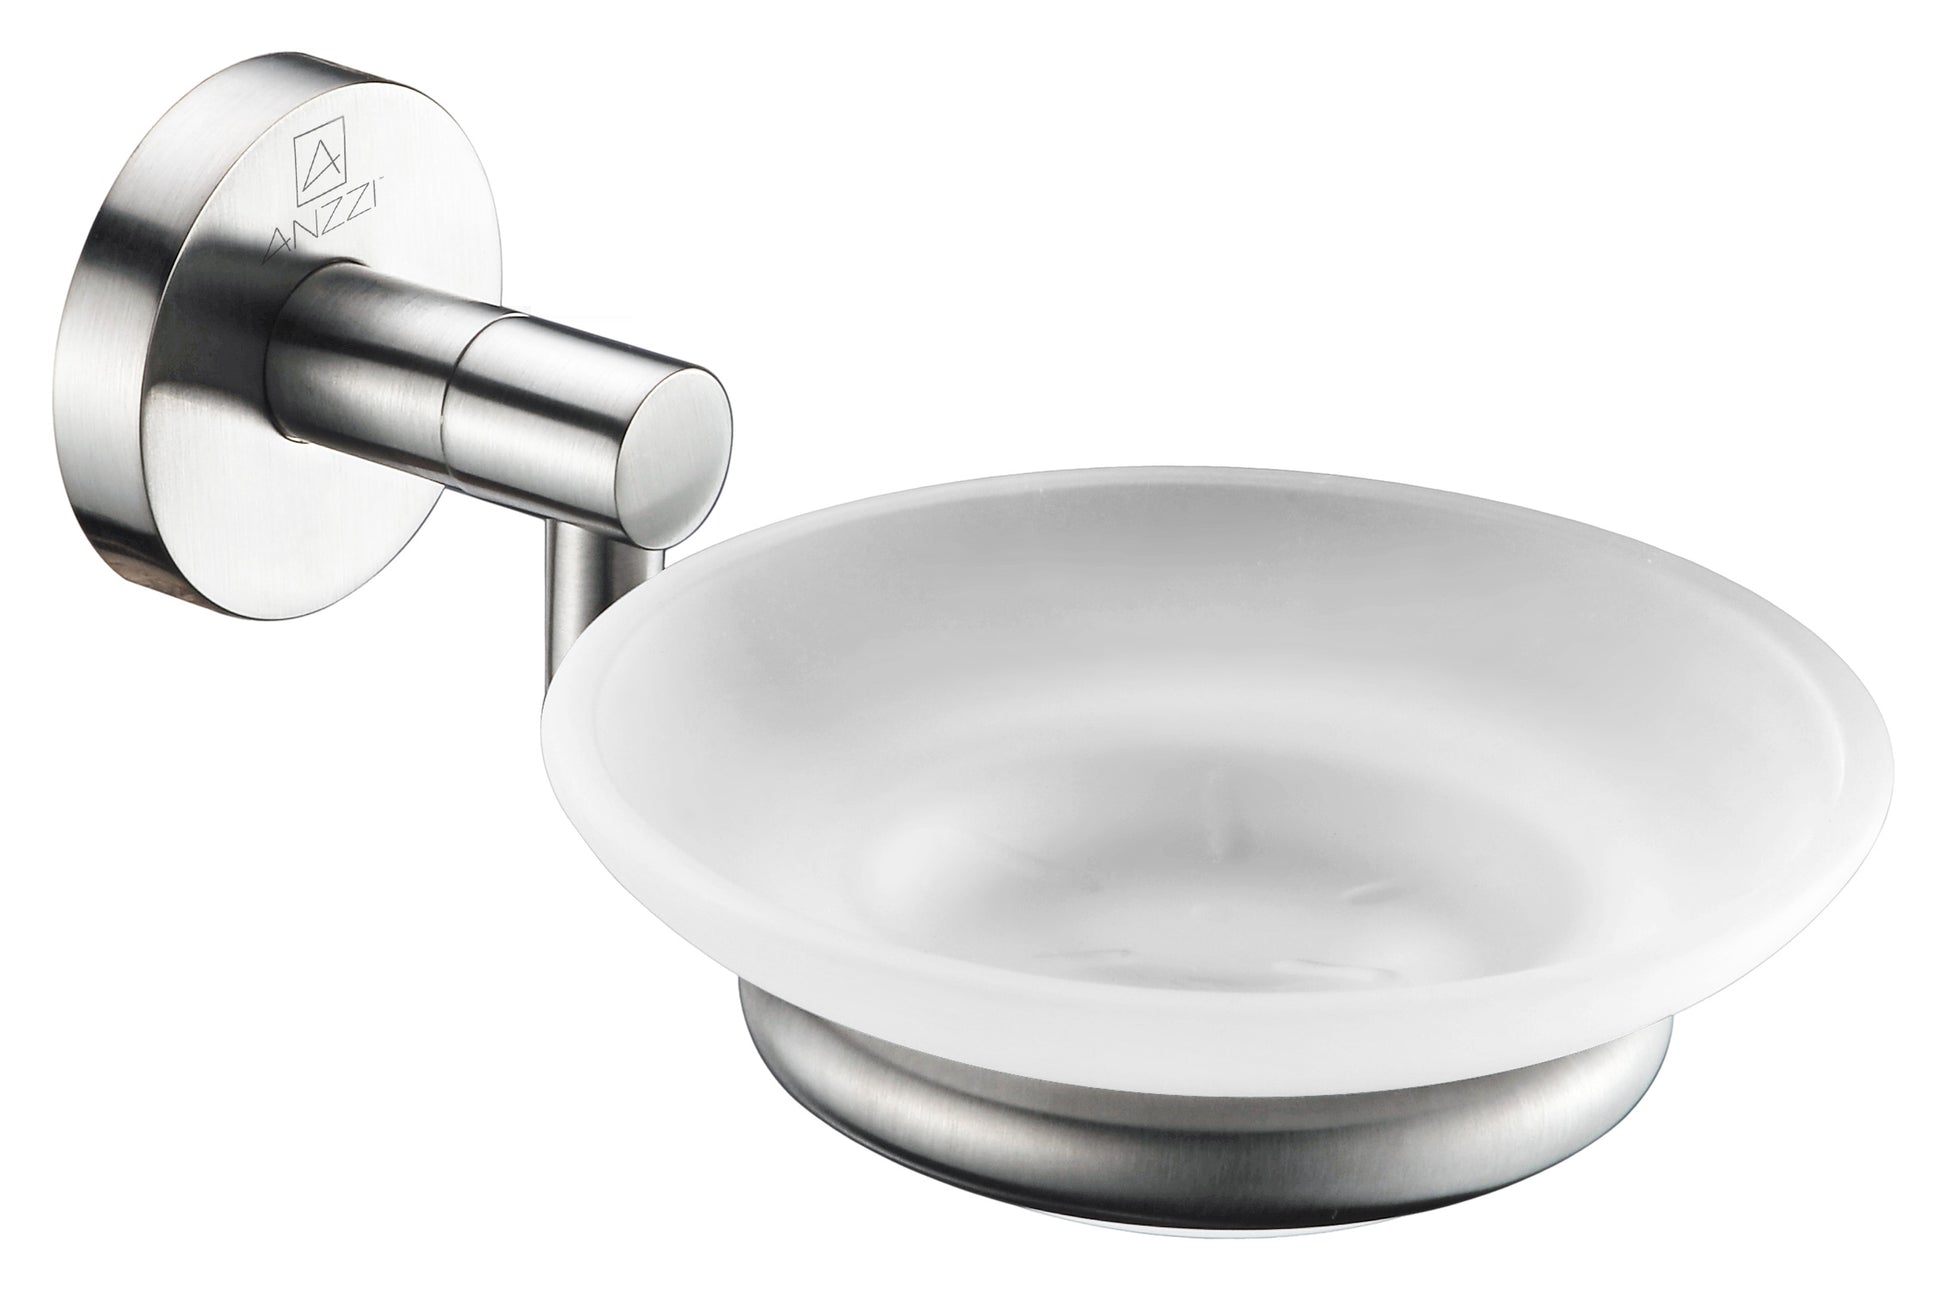 AC-AZ000BN - Caster Series Soap Dish in Brushed Nickel